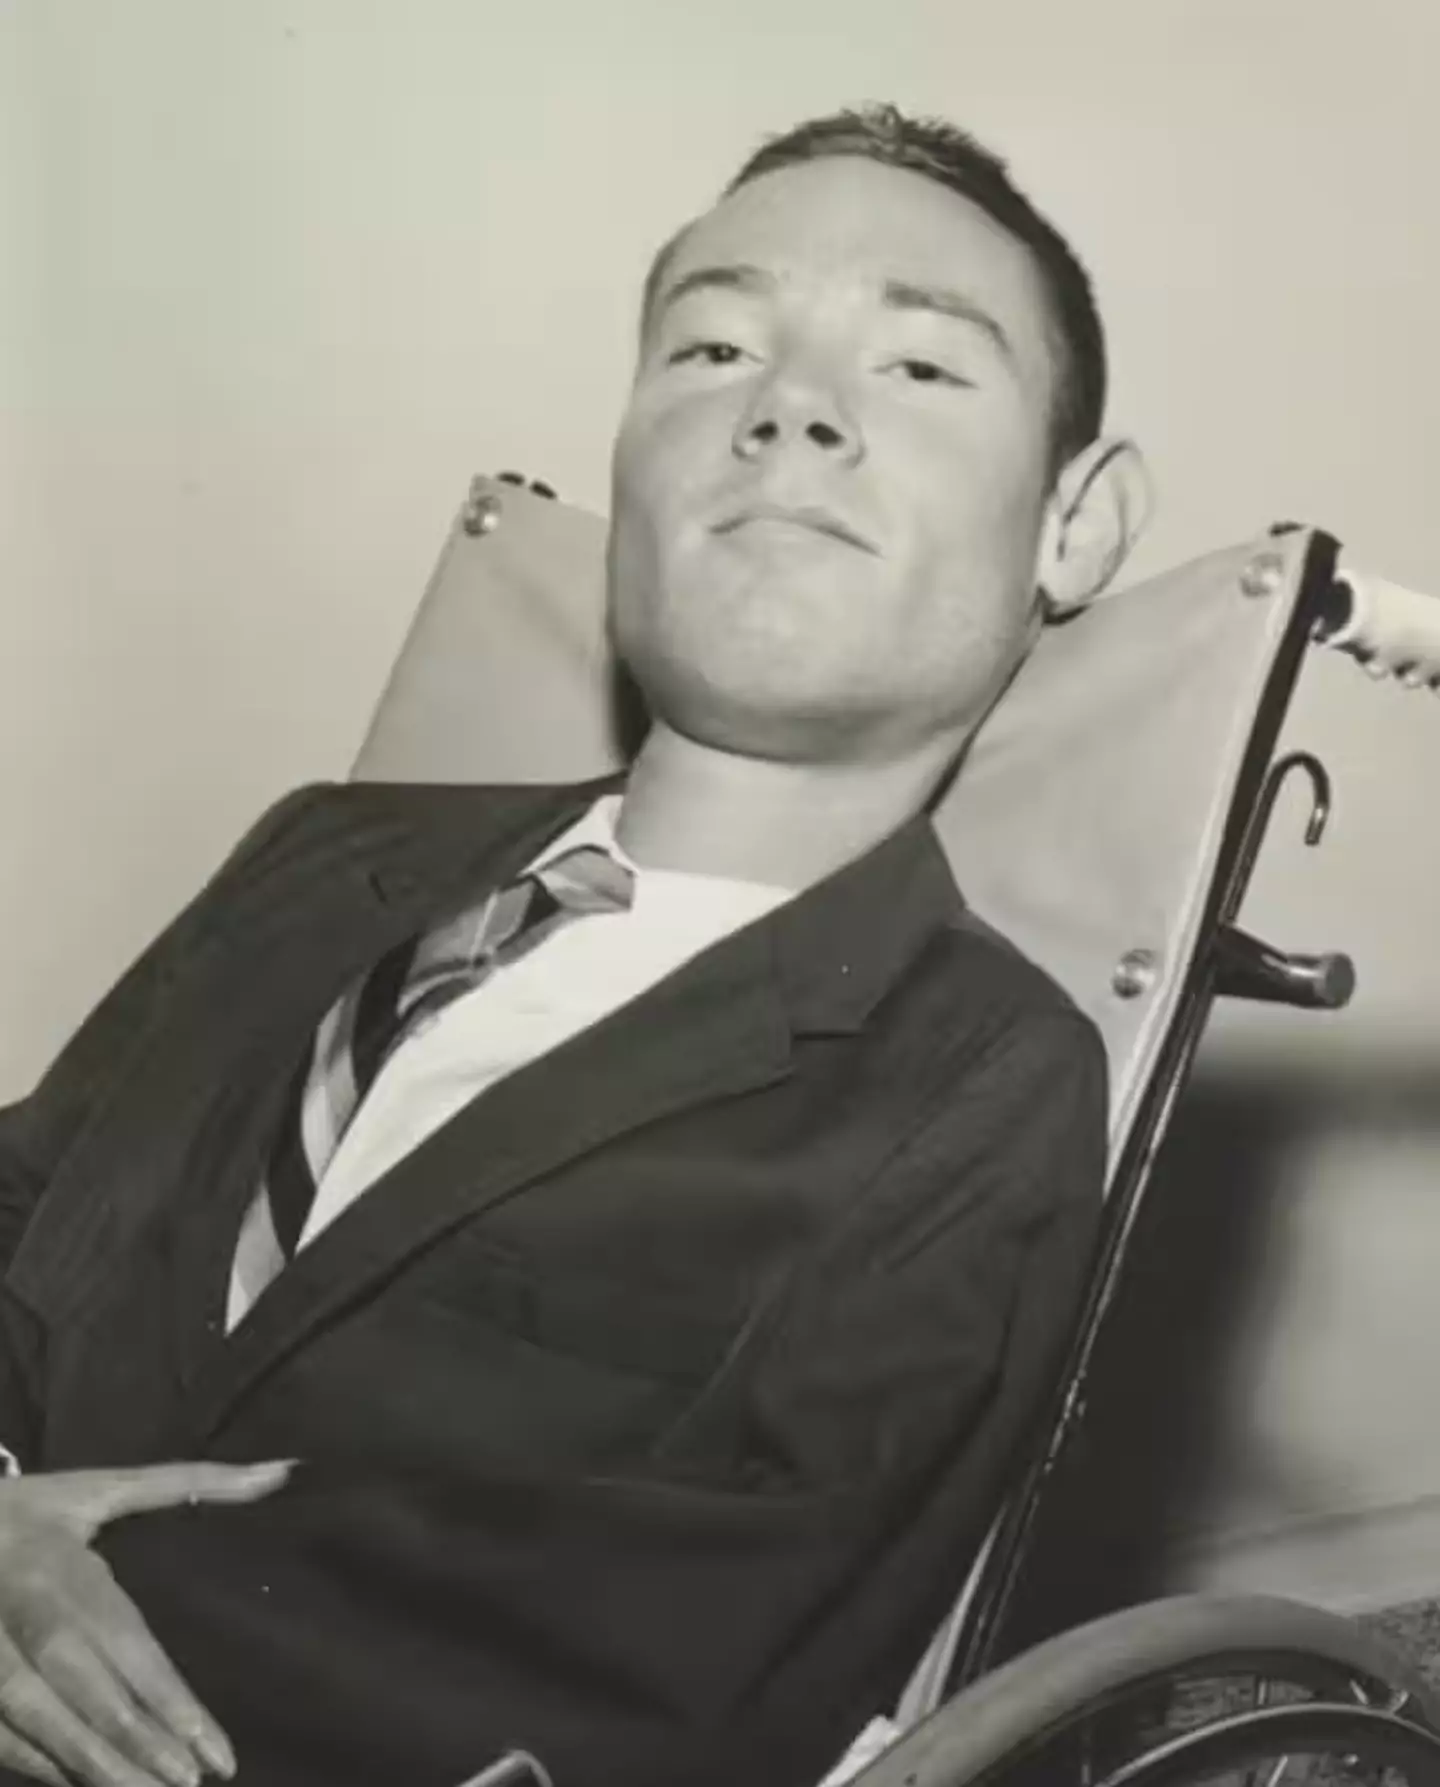 Paul Alexander lived in an iron lung for 70 years.